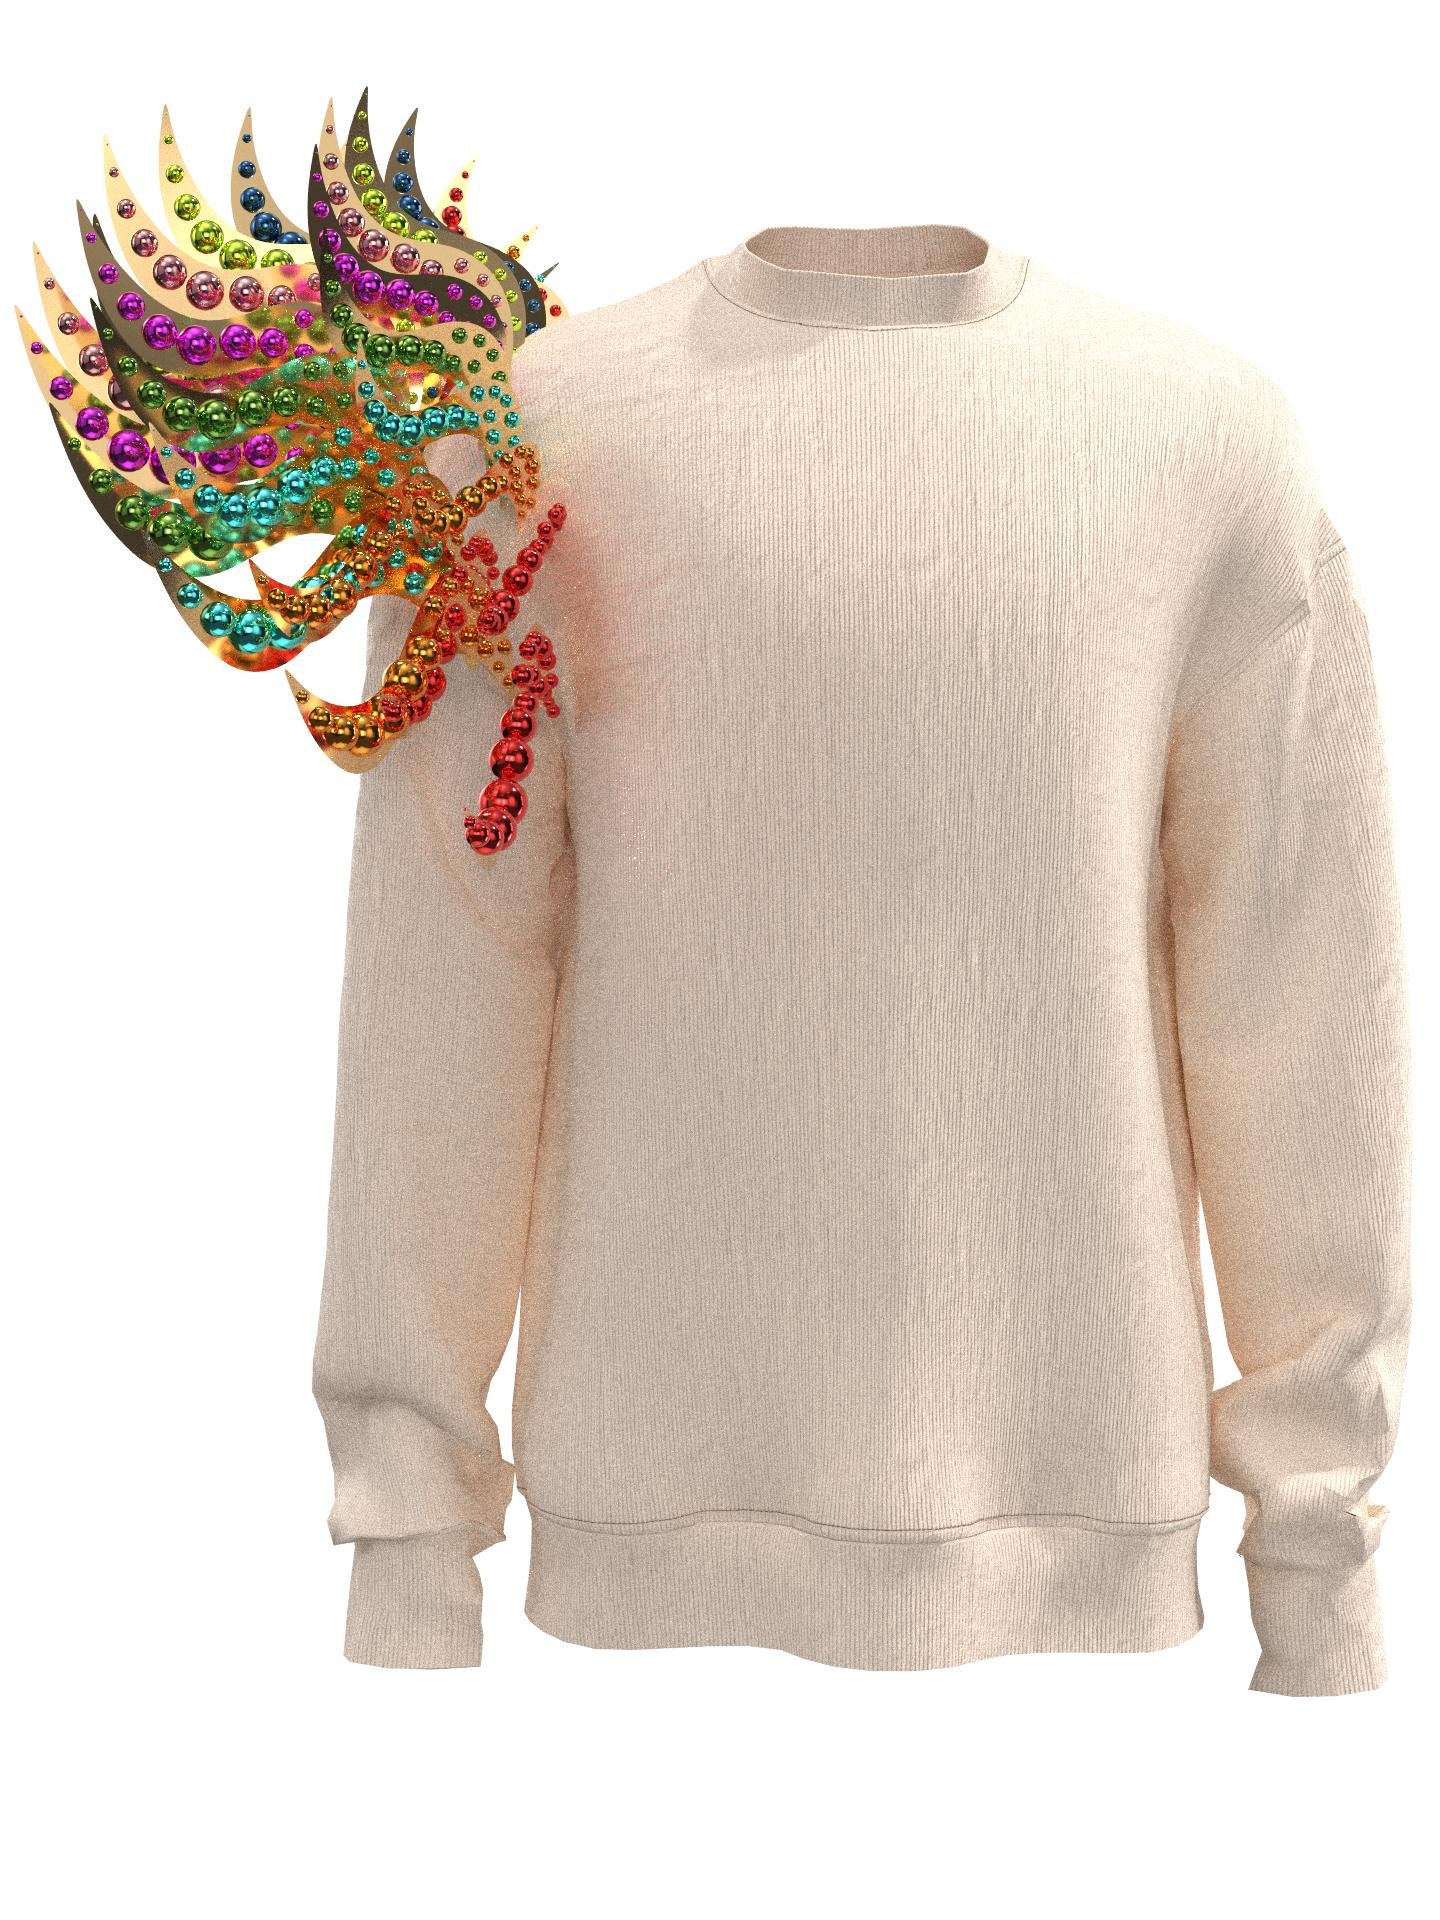 Sweatshirt decorated shoulder white by SDGS INSPIRED COLLECTION